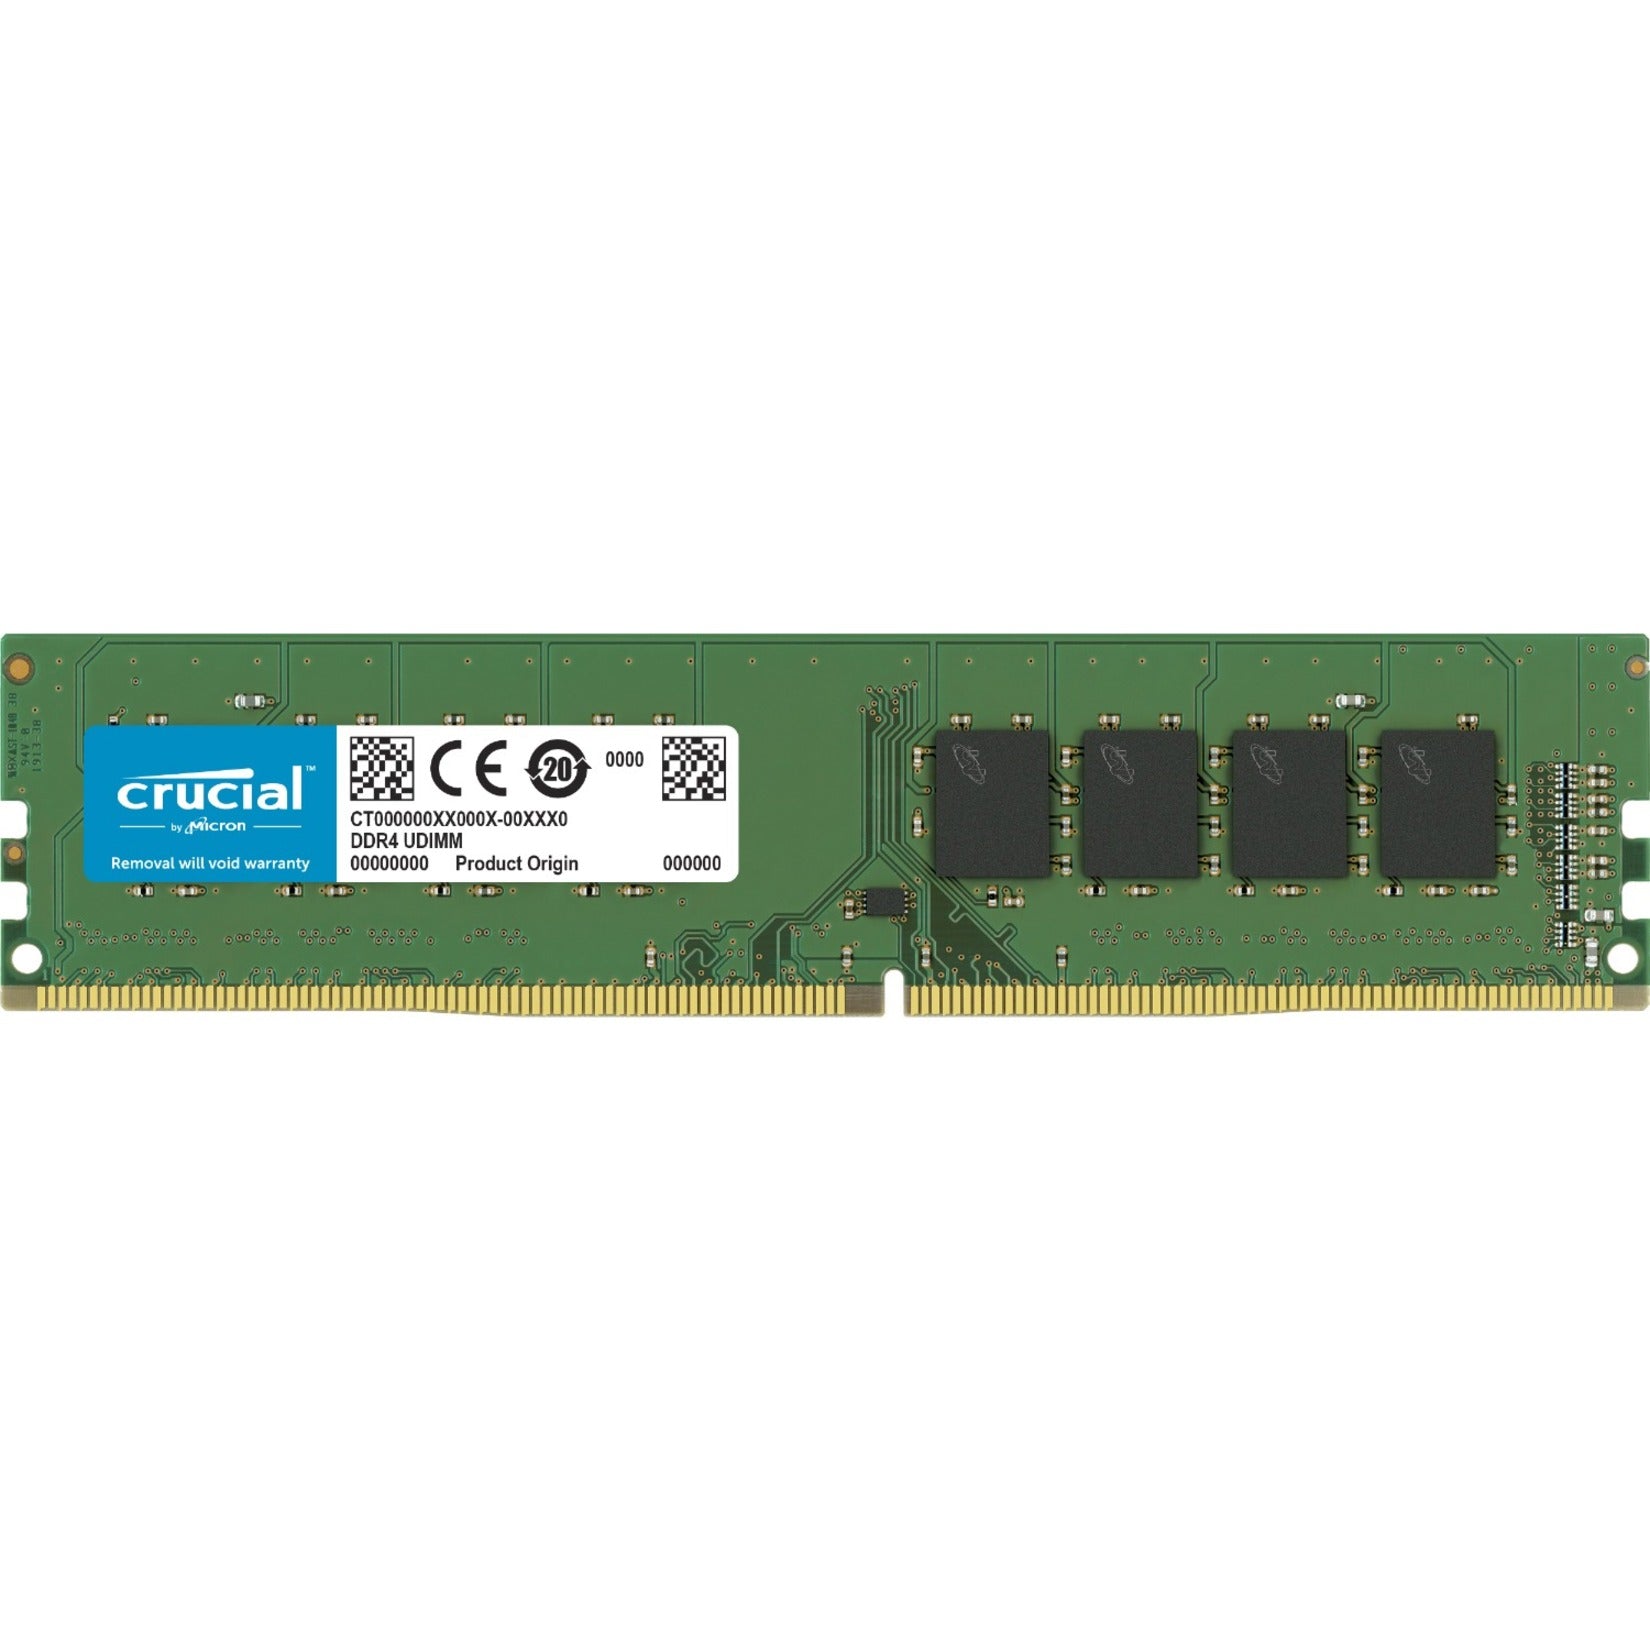 Crucial CT16G4DFD824A 16GB DDR4 SDRAM Memory Module, High Performance RAM for Faster Computing